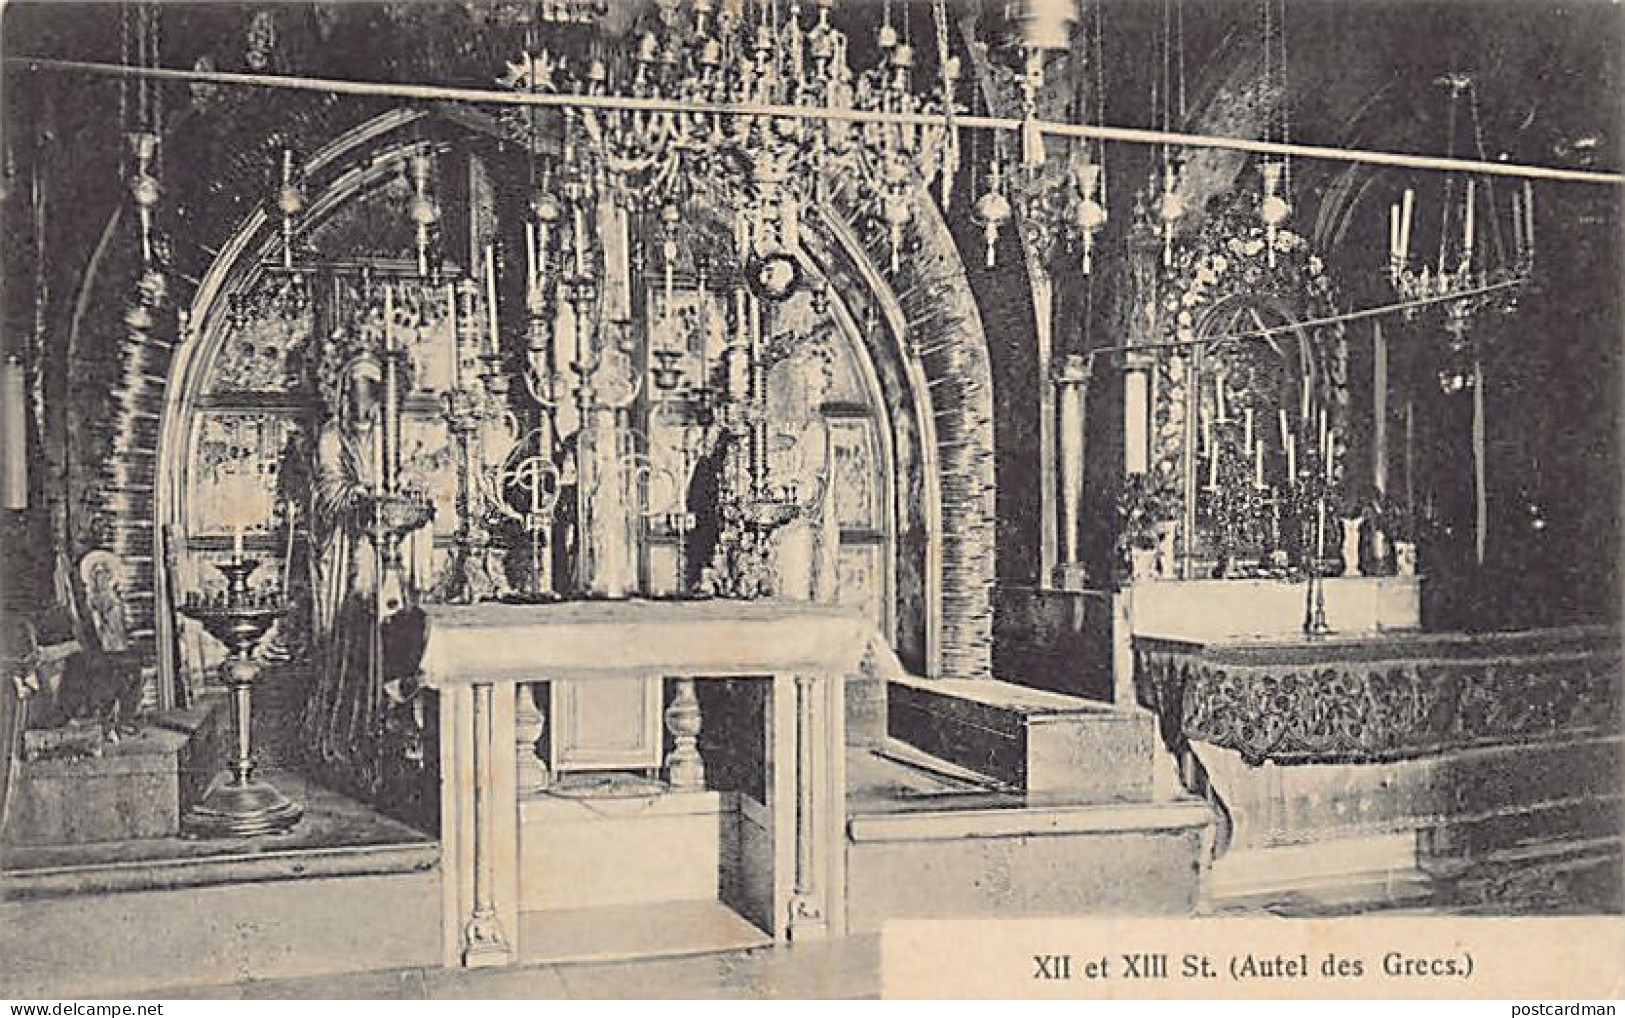 Israel - JERUSALEM - 12th And 13th Stations Of The Cross - The Greeks' Altar - Publ. Unknown 86 - Israel